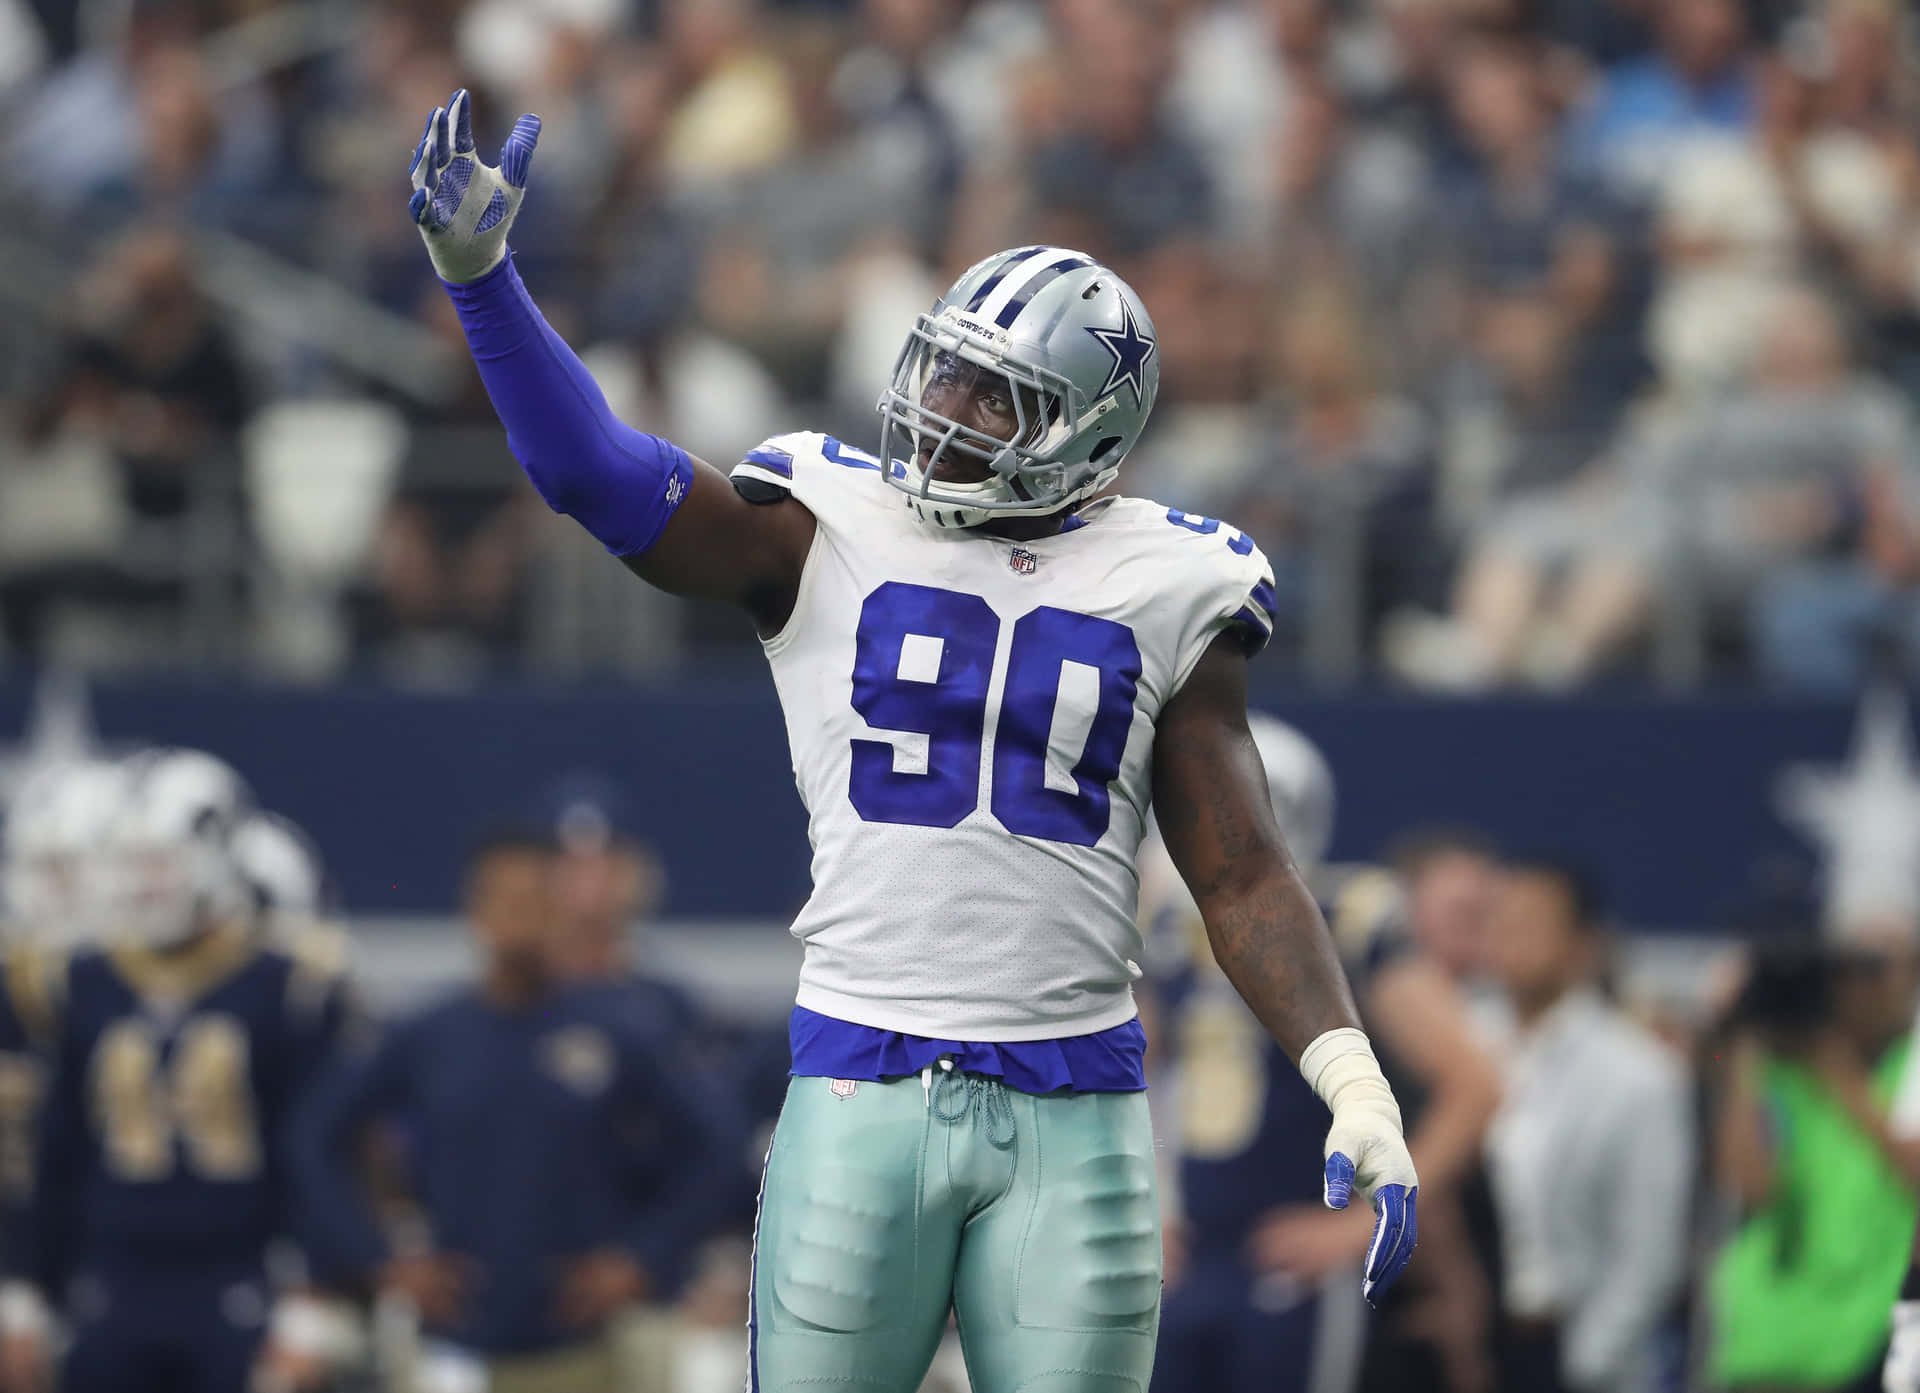 Demarcus Lawrence Pro Athlete Wallpaper